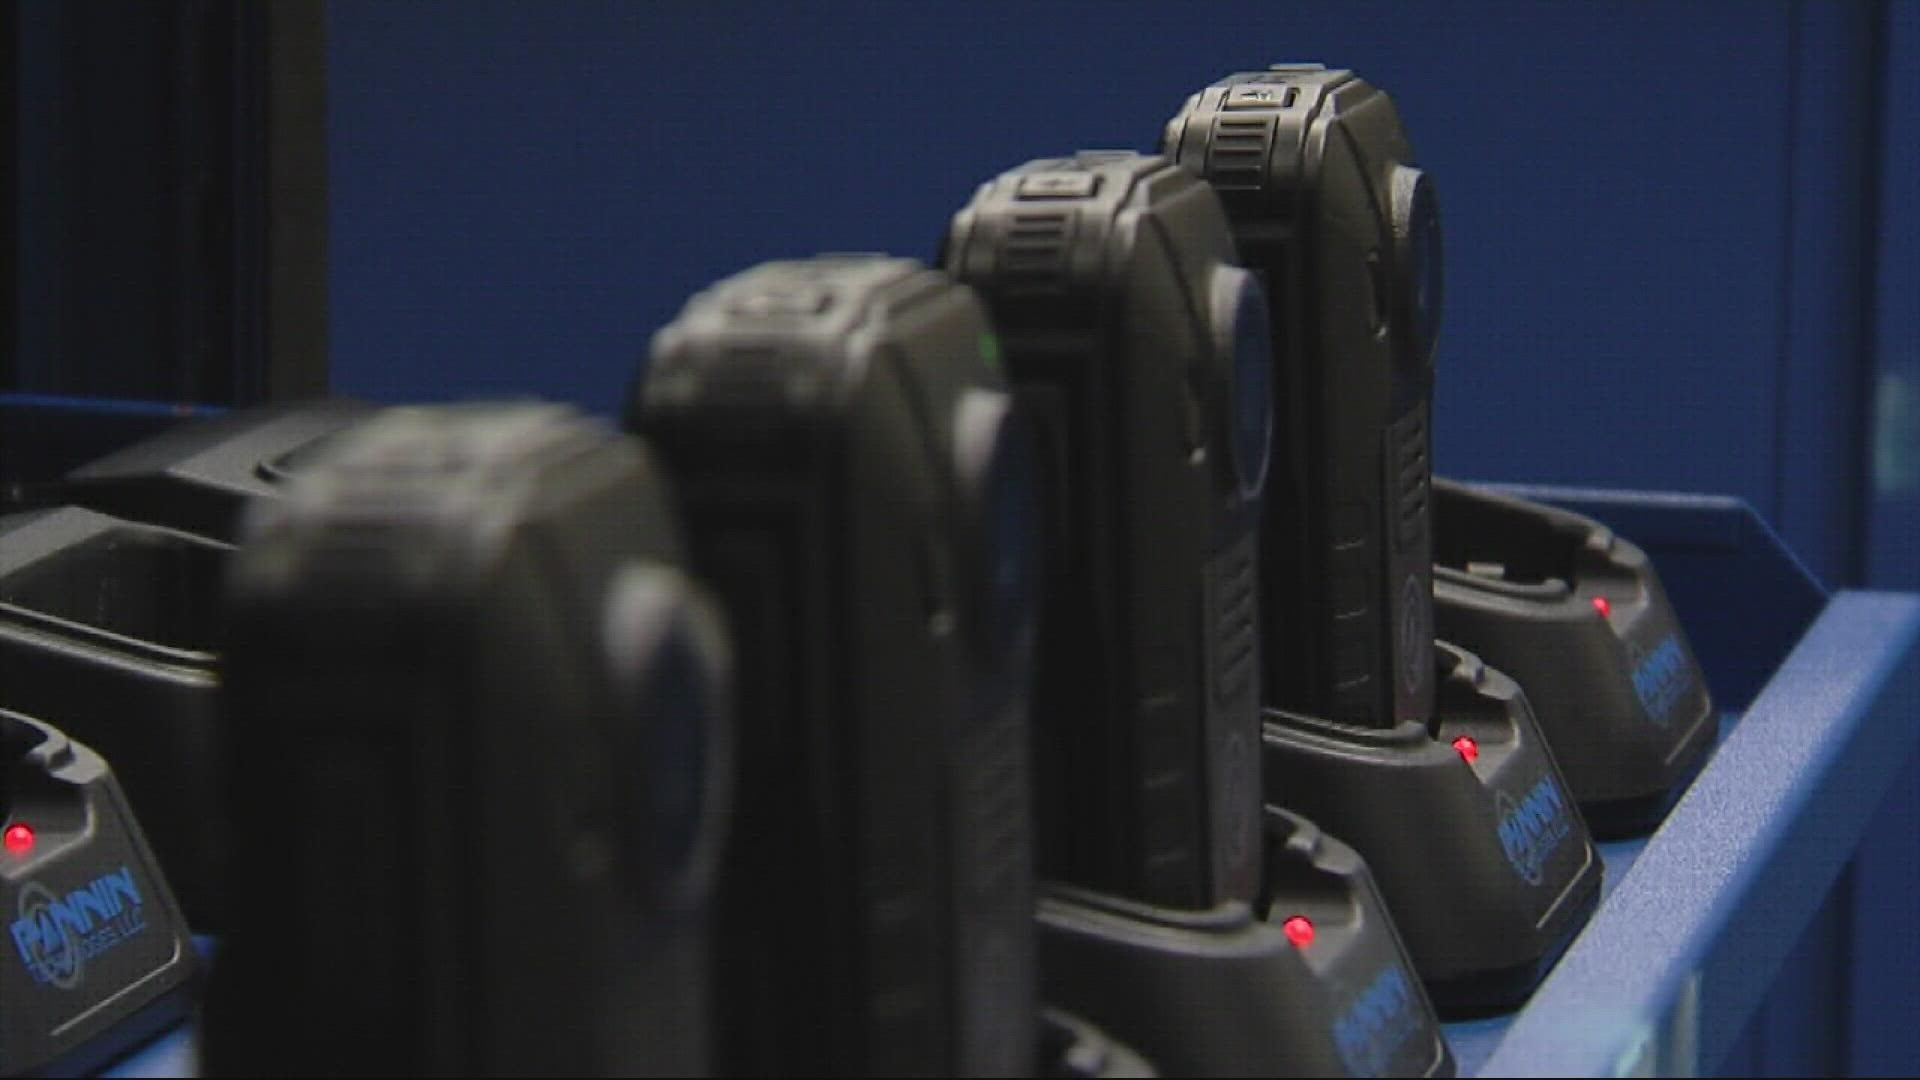 The Portland City Council will open up bidding on a $2.6 million contract for body cameras. Portland police are the only department in a major city that doesn’t have